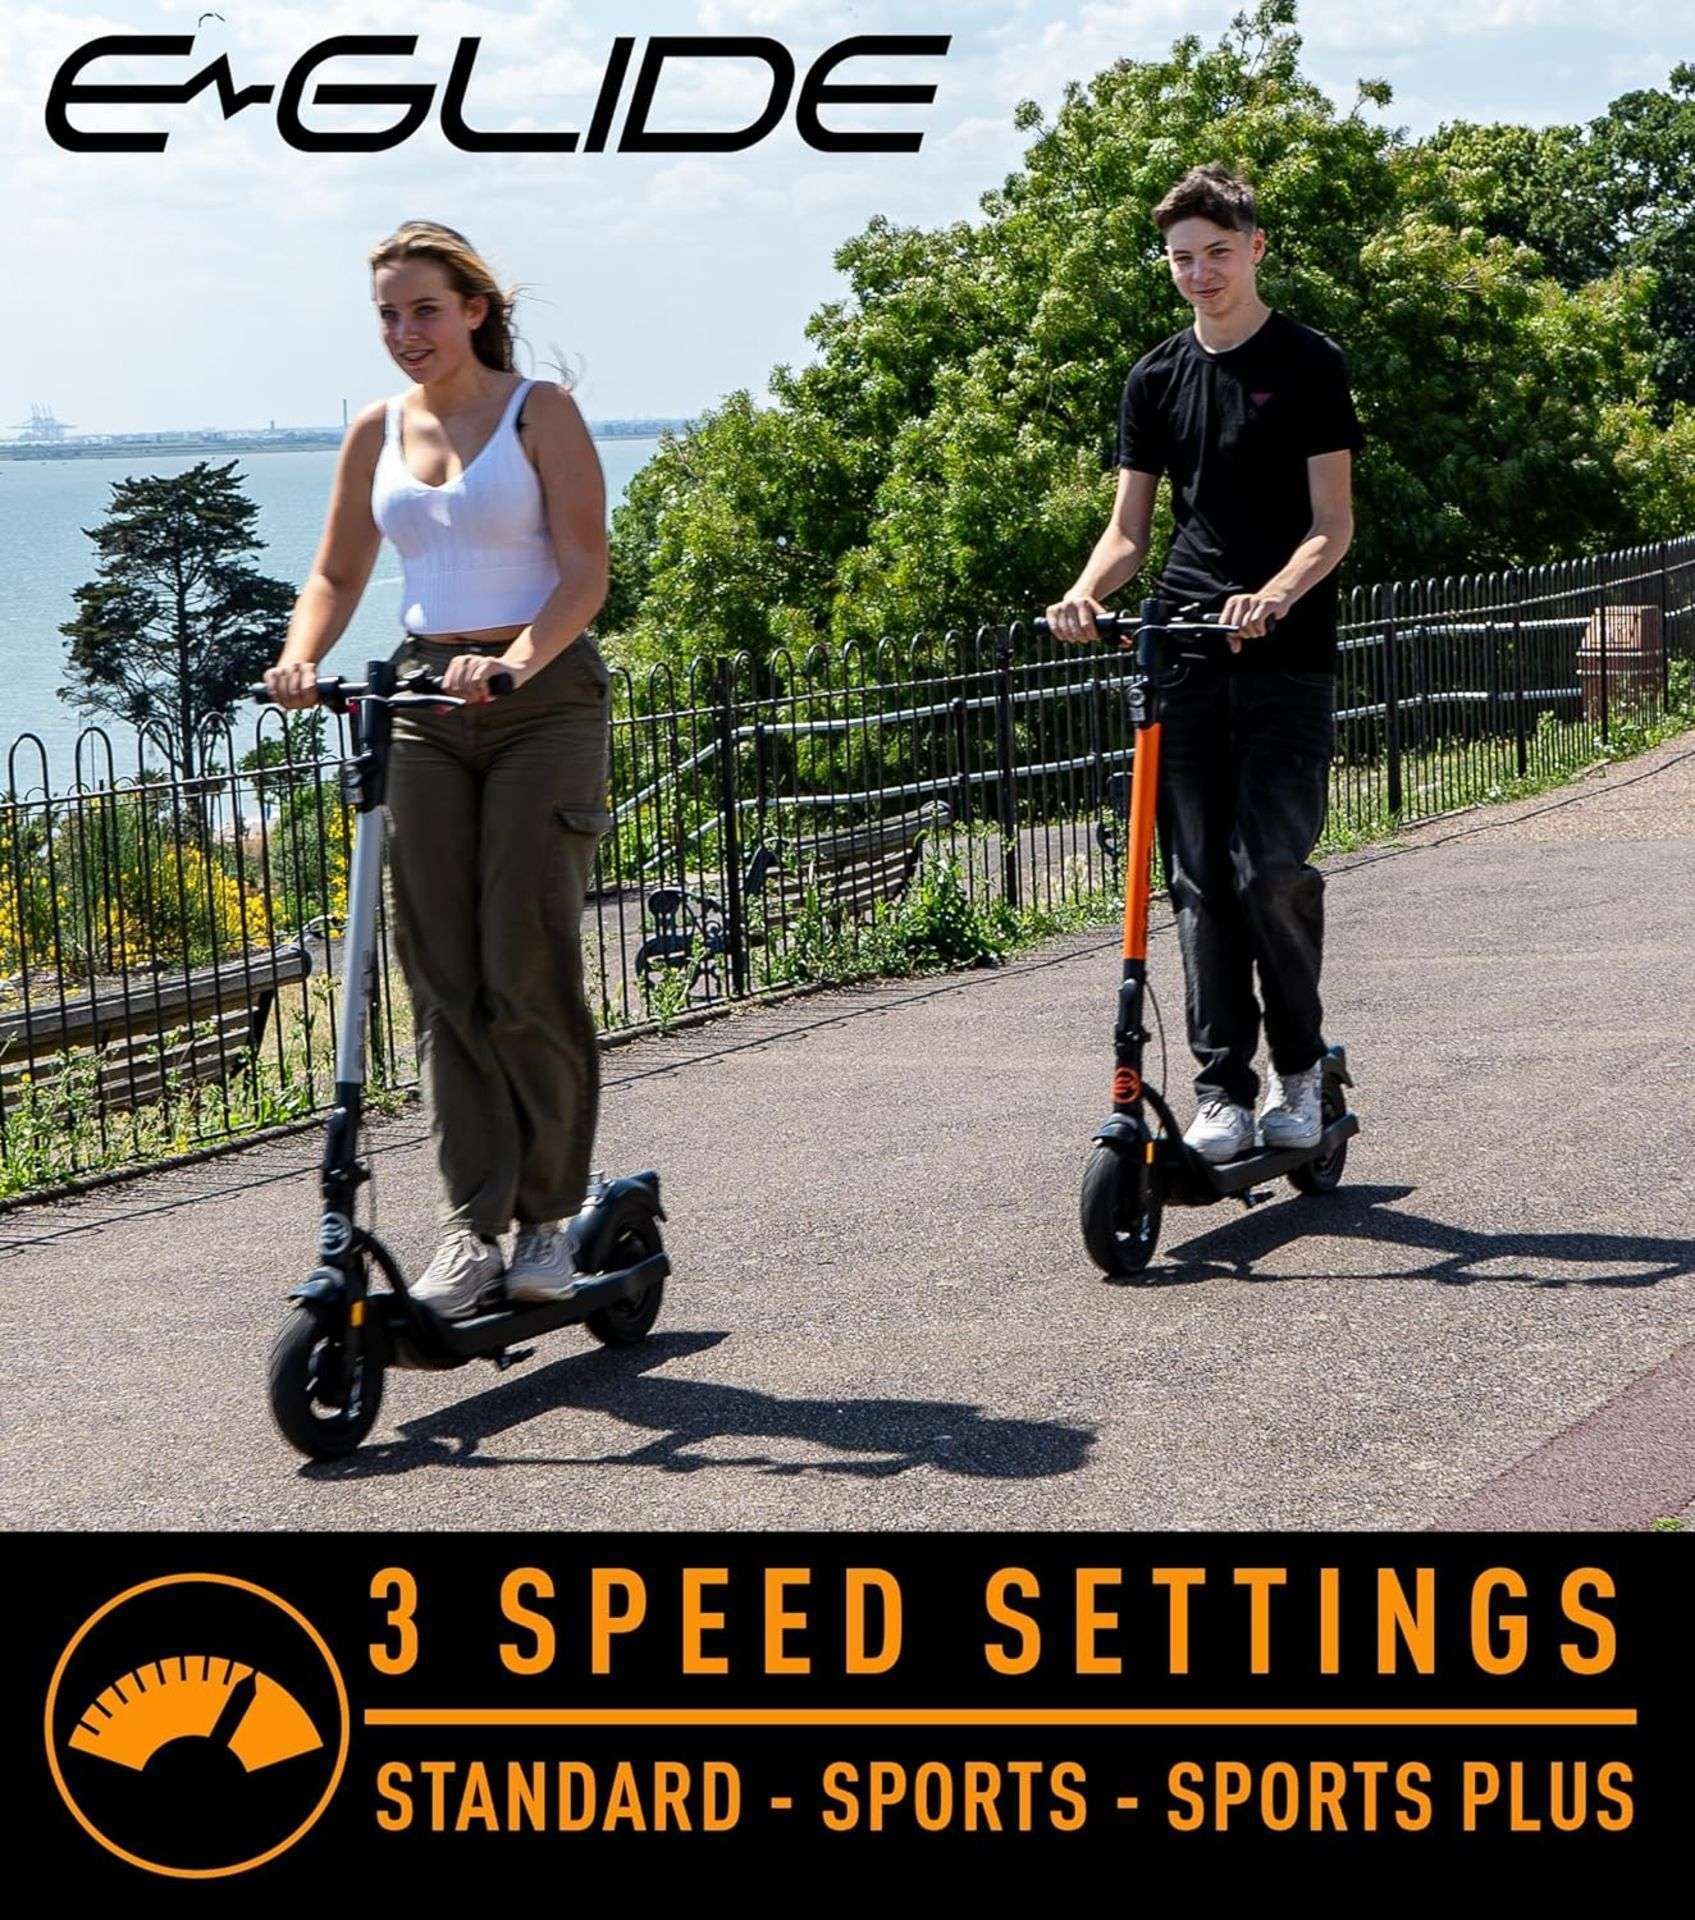 Brand New E-Glide V2 Electric Scooter Grey and Black RRP £599, Introducing a sleek and efficient - Image 5 of 5